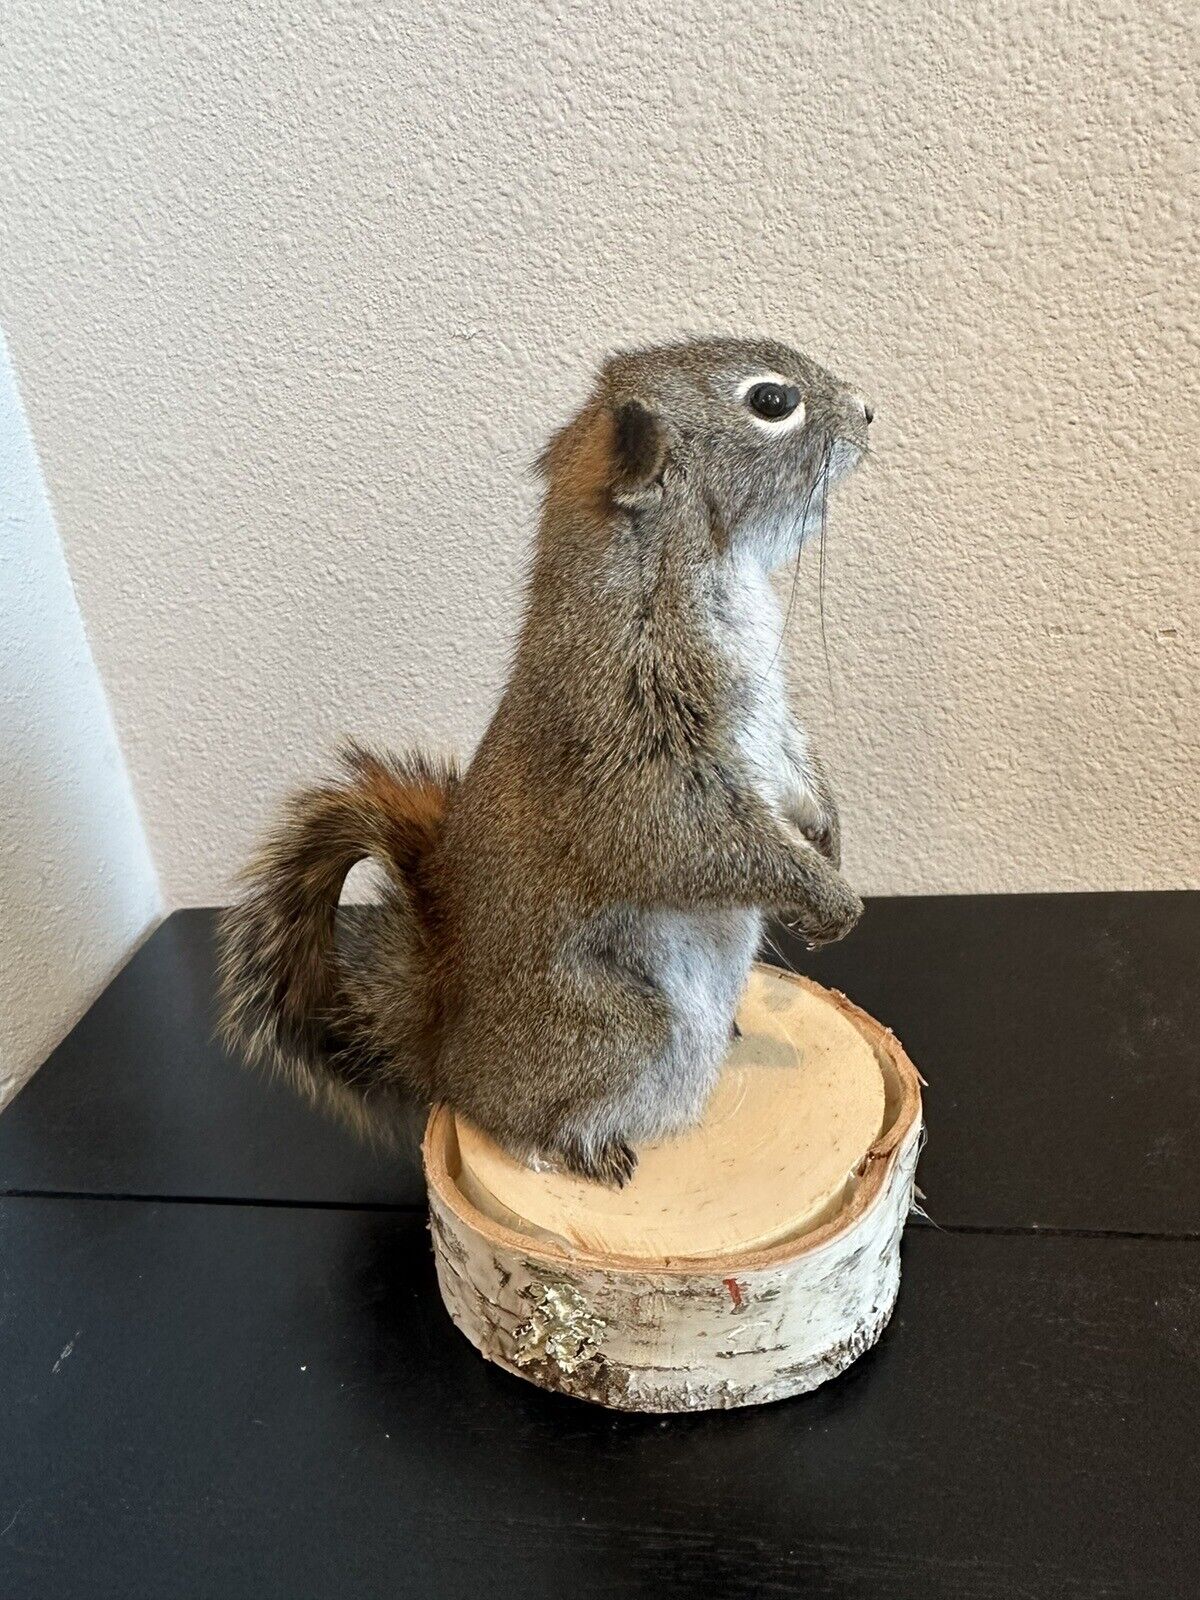 Beautiful Adorable Red Squirrel Small Animal Taxidermy Mount Art Wildlife